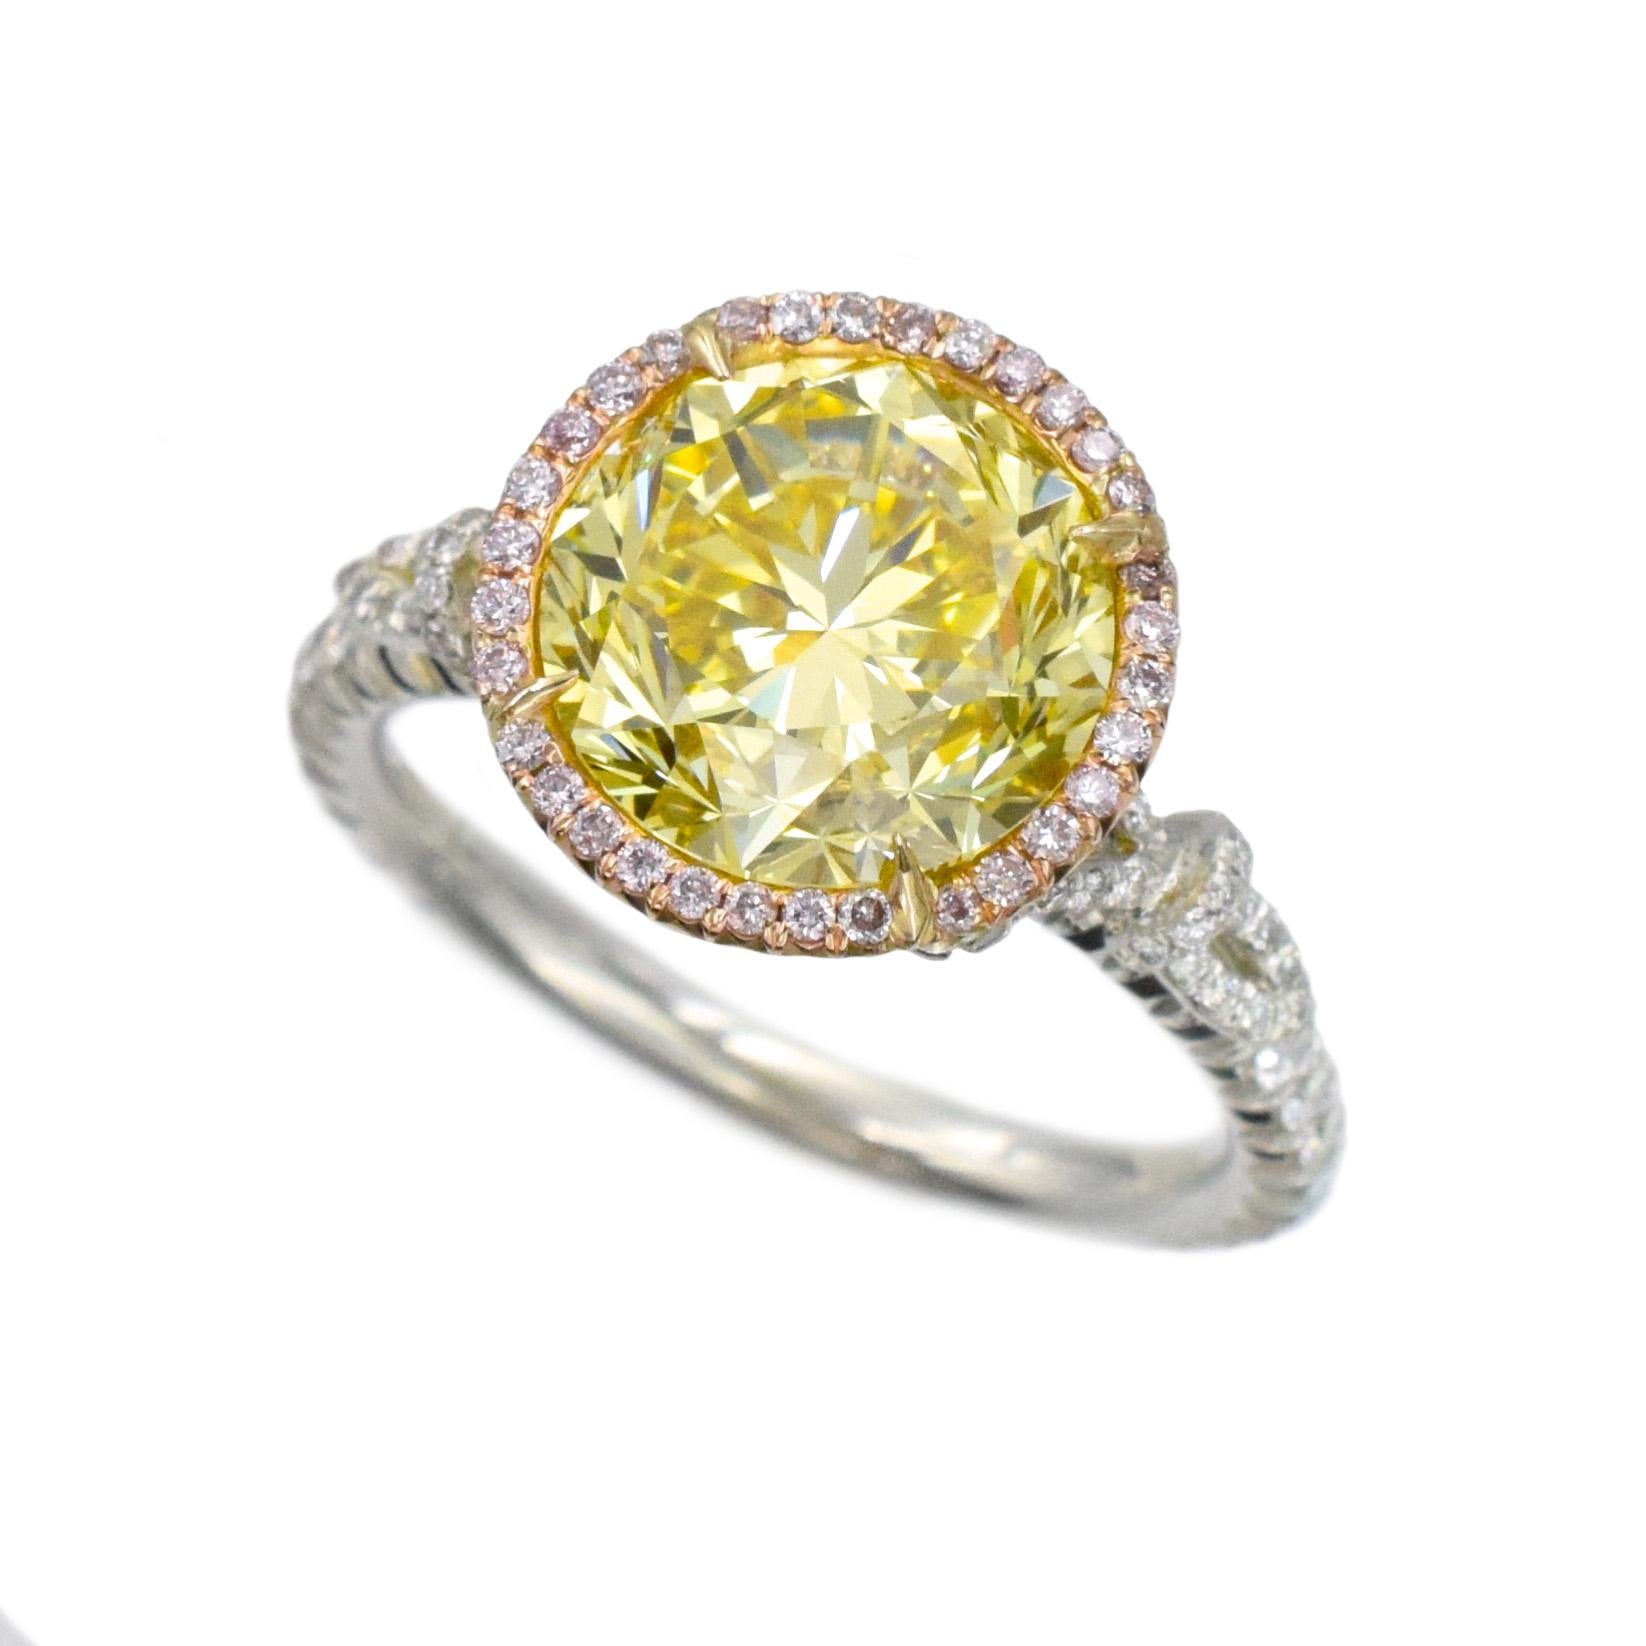 NALLY Vivid Intense Yellow color diamond ring with 3.76 carat center diamond GIA # xxxxxxx
Color Fancy Vivid Yellow,  Clarity- VS1
This ring has 74 round brilliant cut diamonds 0.53 carats set in platinum with 81 pink color round brilliant cut